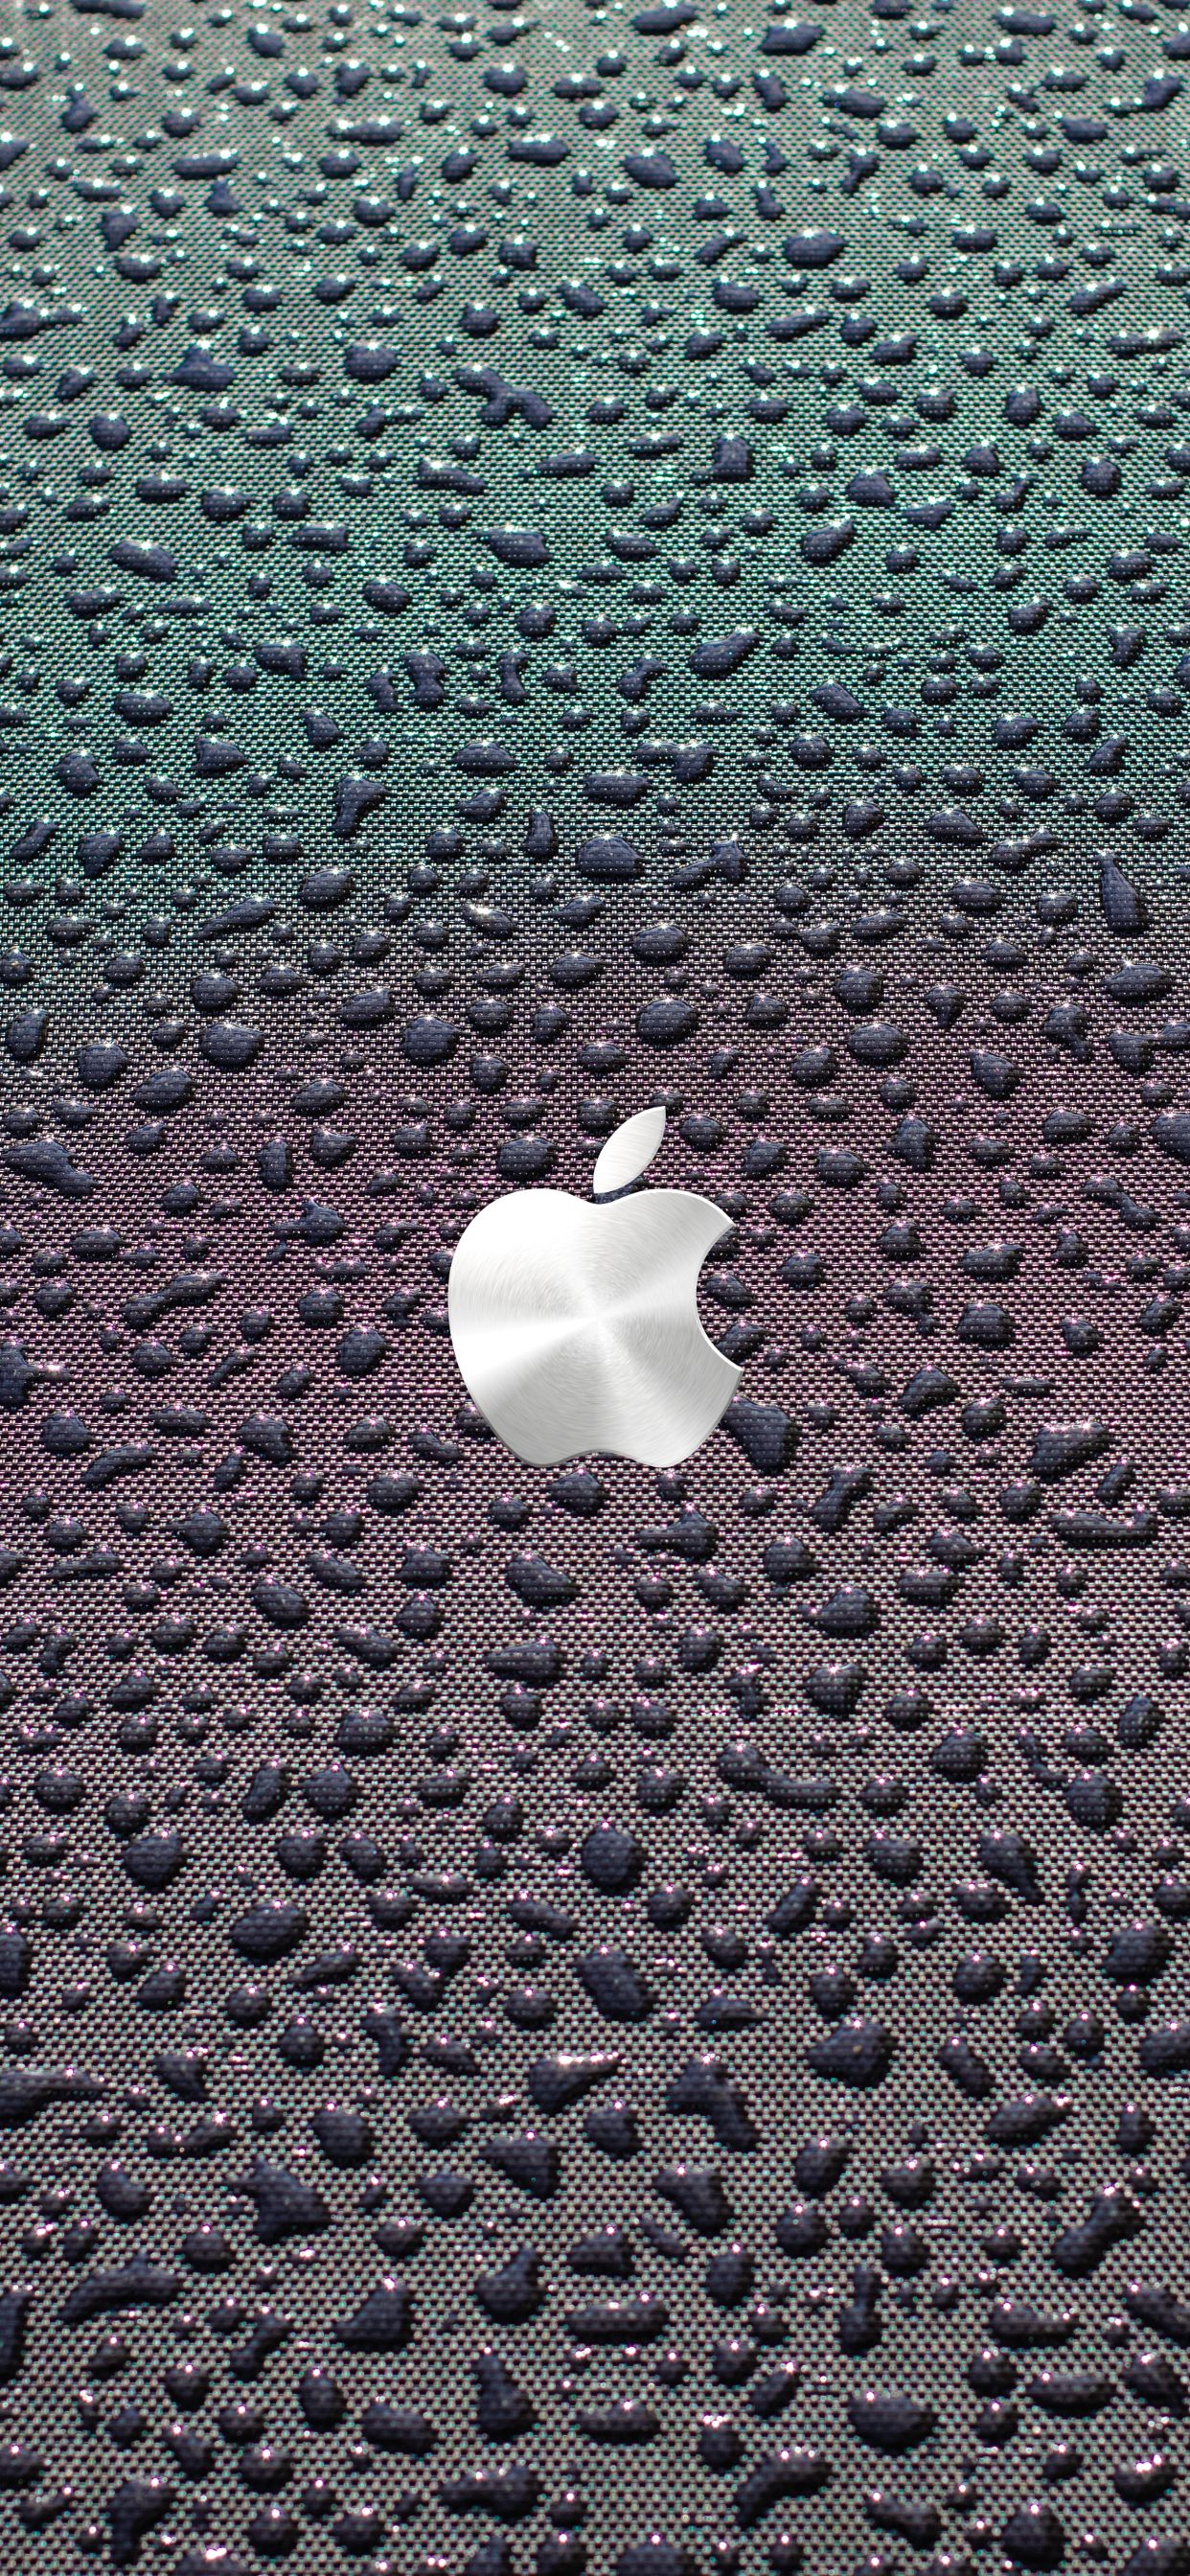 4 Cool Apple logo iphone wallpapers HD